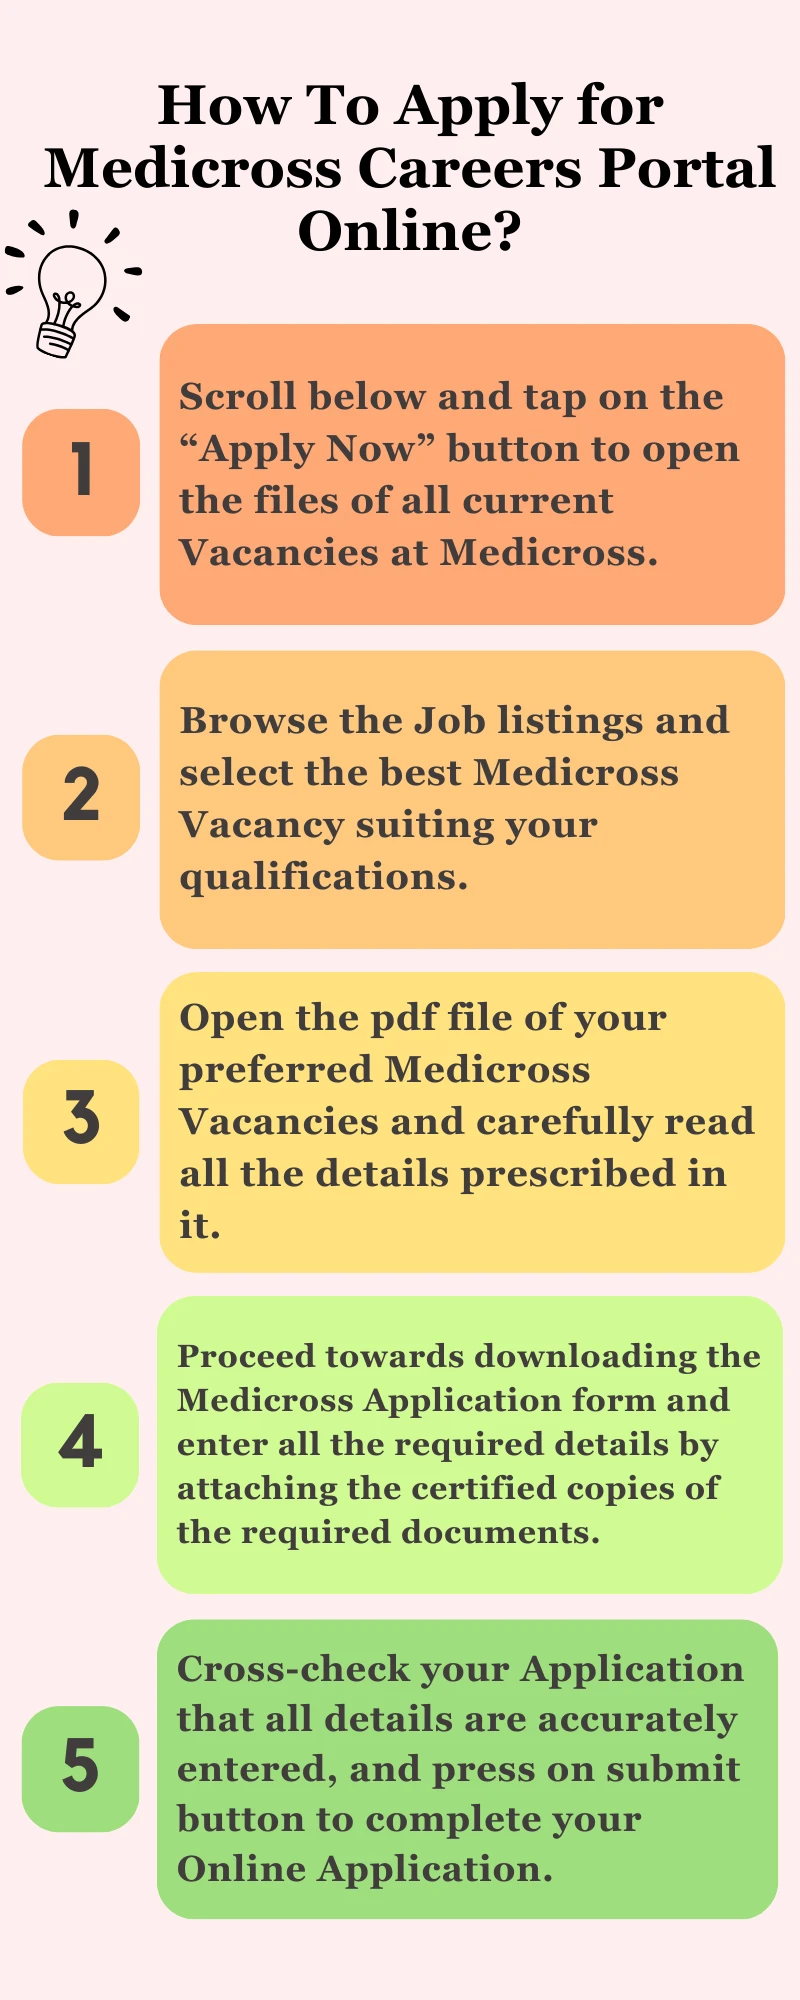 How To Apply for Medicross Careers Portal Online?